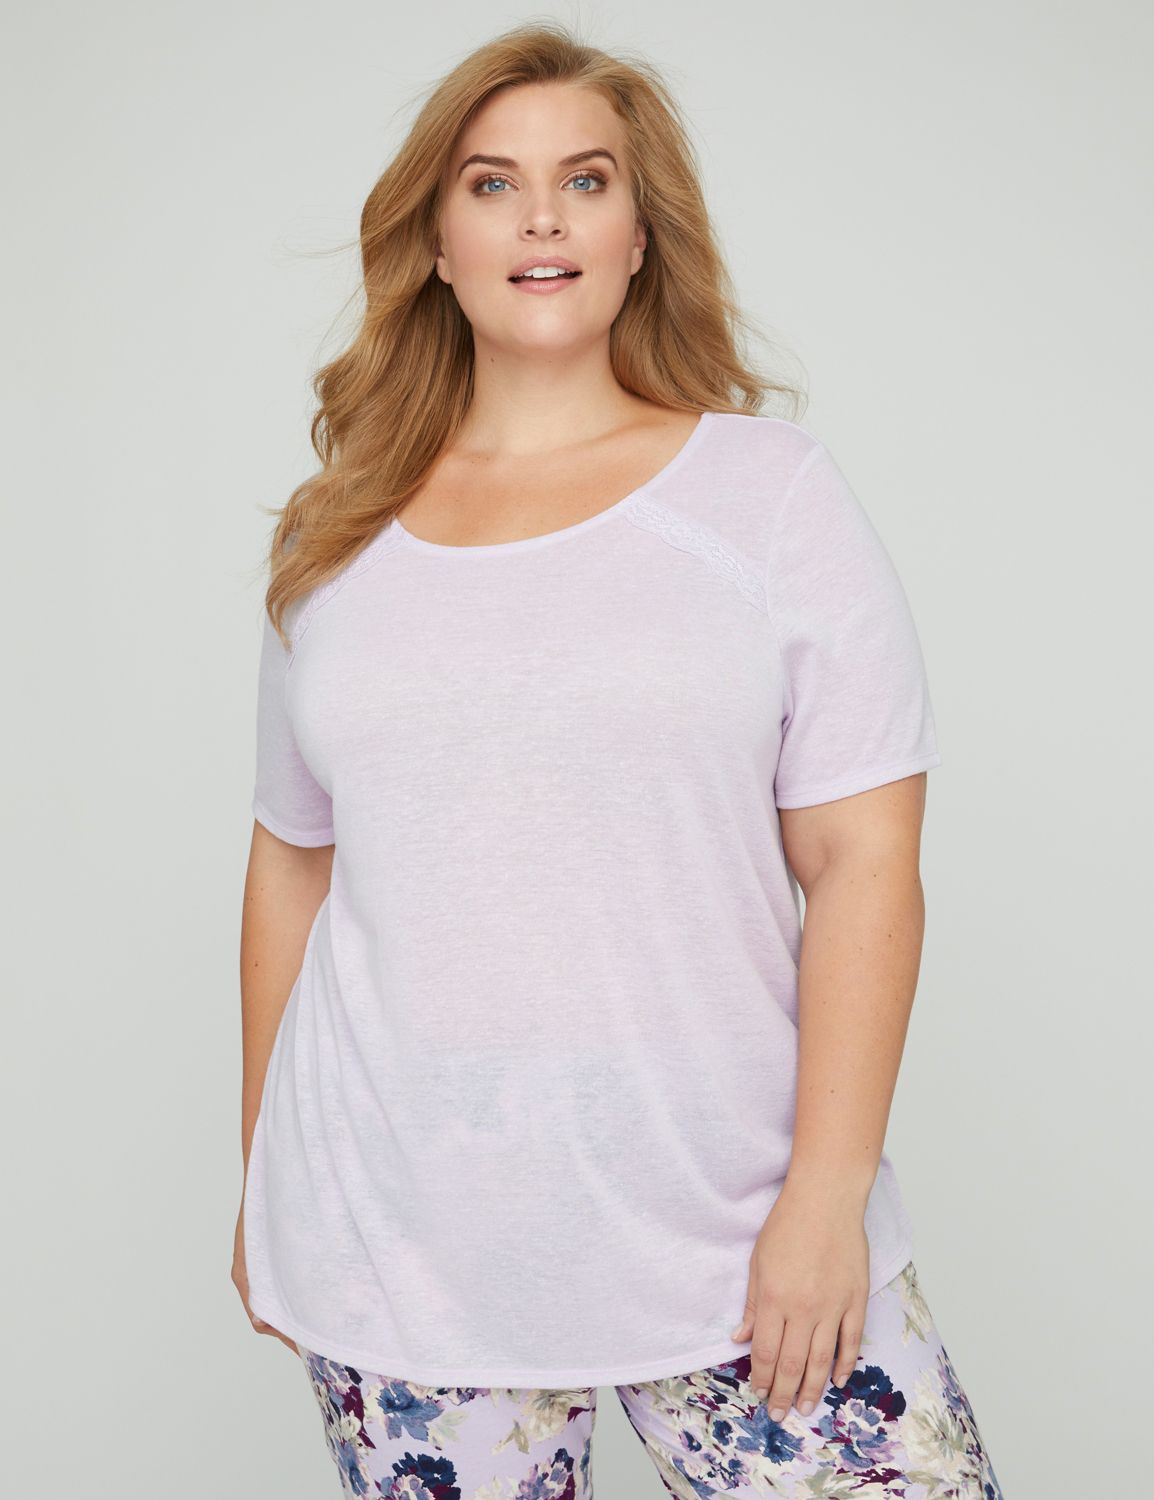 A super-soft sleep tee in jersey knit with a delicate touch of lace accenting the front yoke. We love the strappy details that accentuate the deep V-neck back. Scoop neck. Short sleeves. Complete your look with our Pretty Petals Sleep Capri. Item Number #315493, 85% Polyester/15% Linen, Machine Wash, Imported Plus Size Sleepwear, Length: 30.375" , Plus Sizes 0X-5X, Catherines Plus Sizes